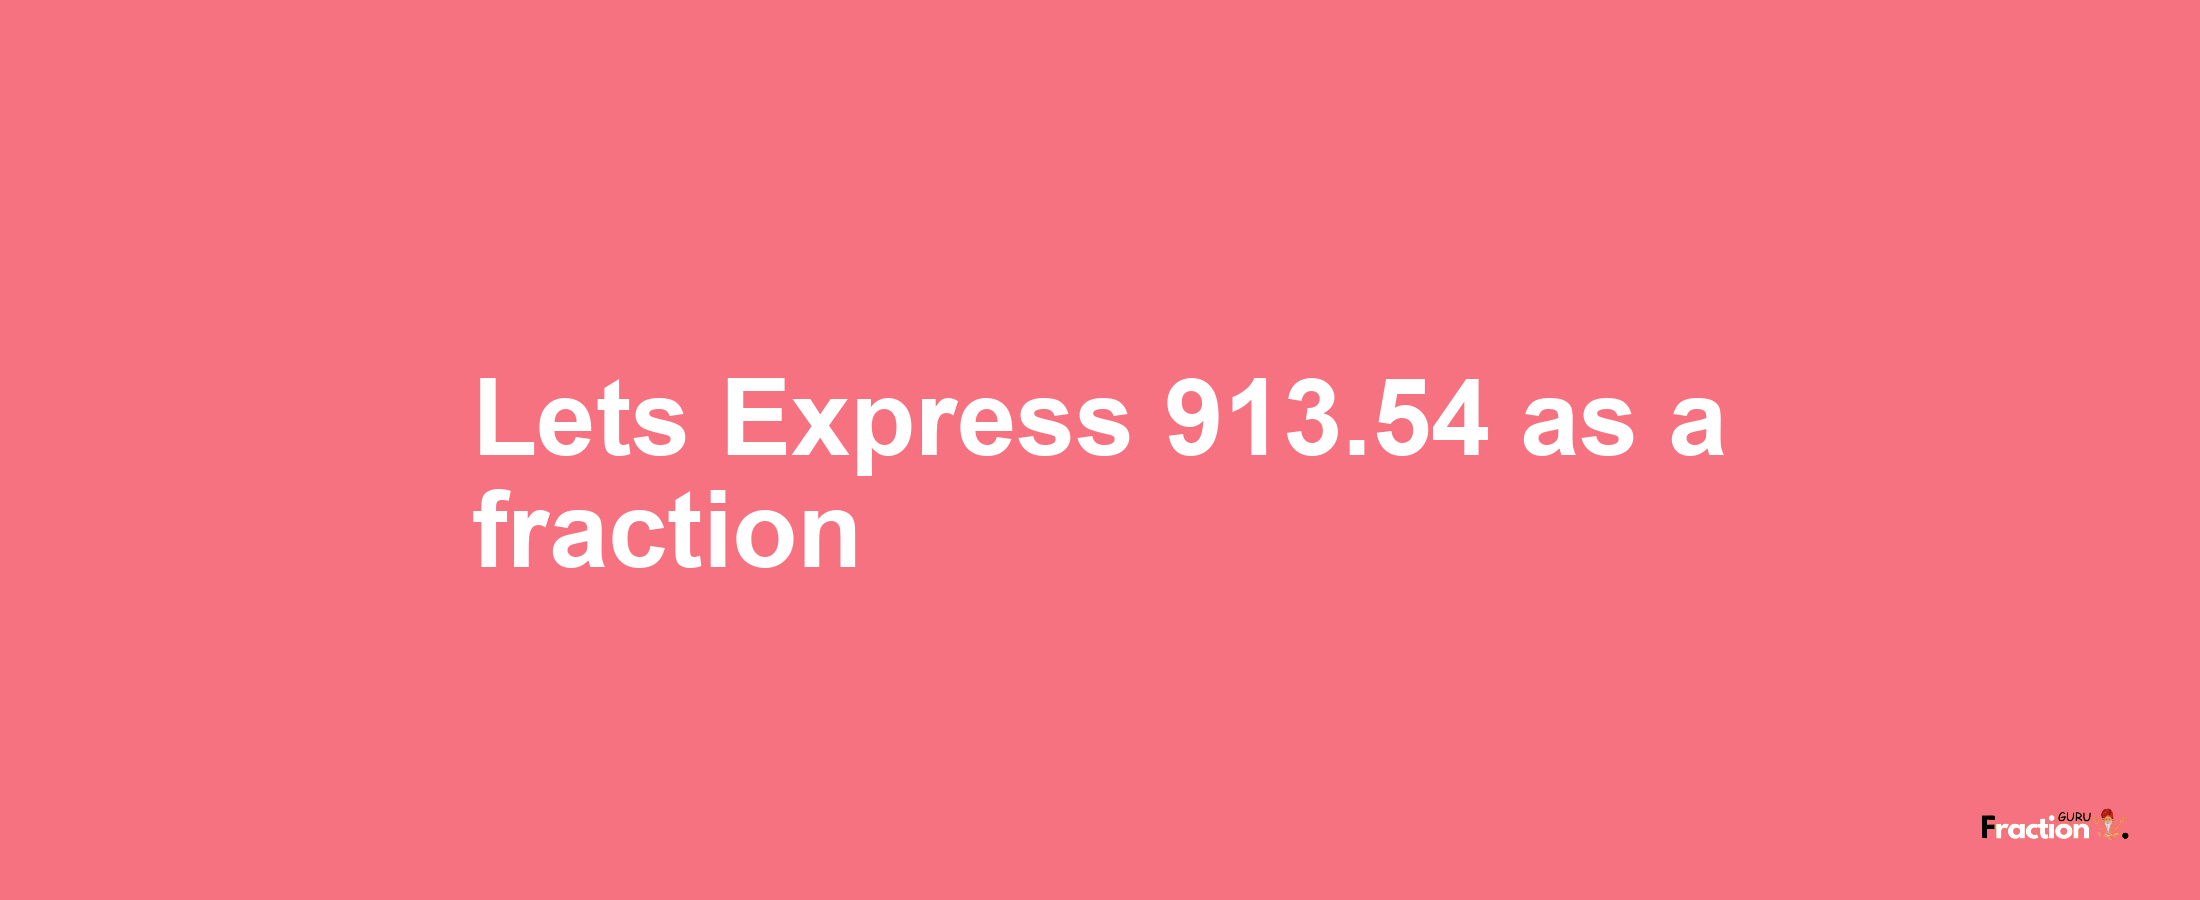 Lets Express 913.54 as afraction